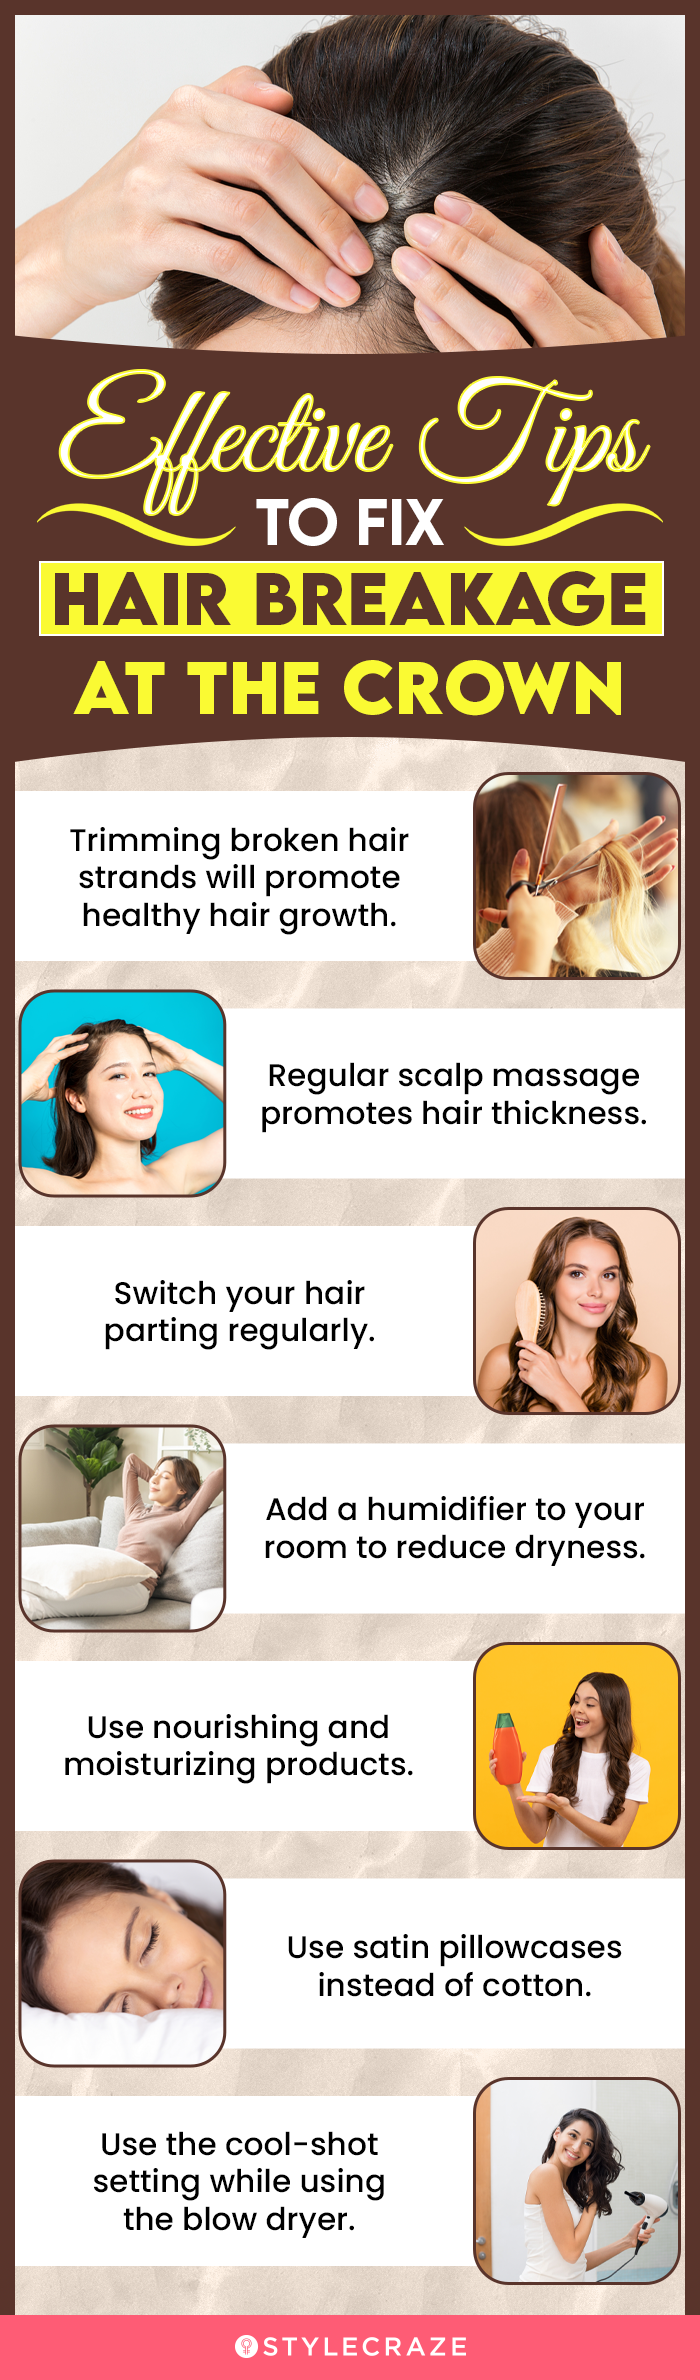 effective tips to fix hair breakage at the crown (infographic)